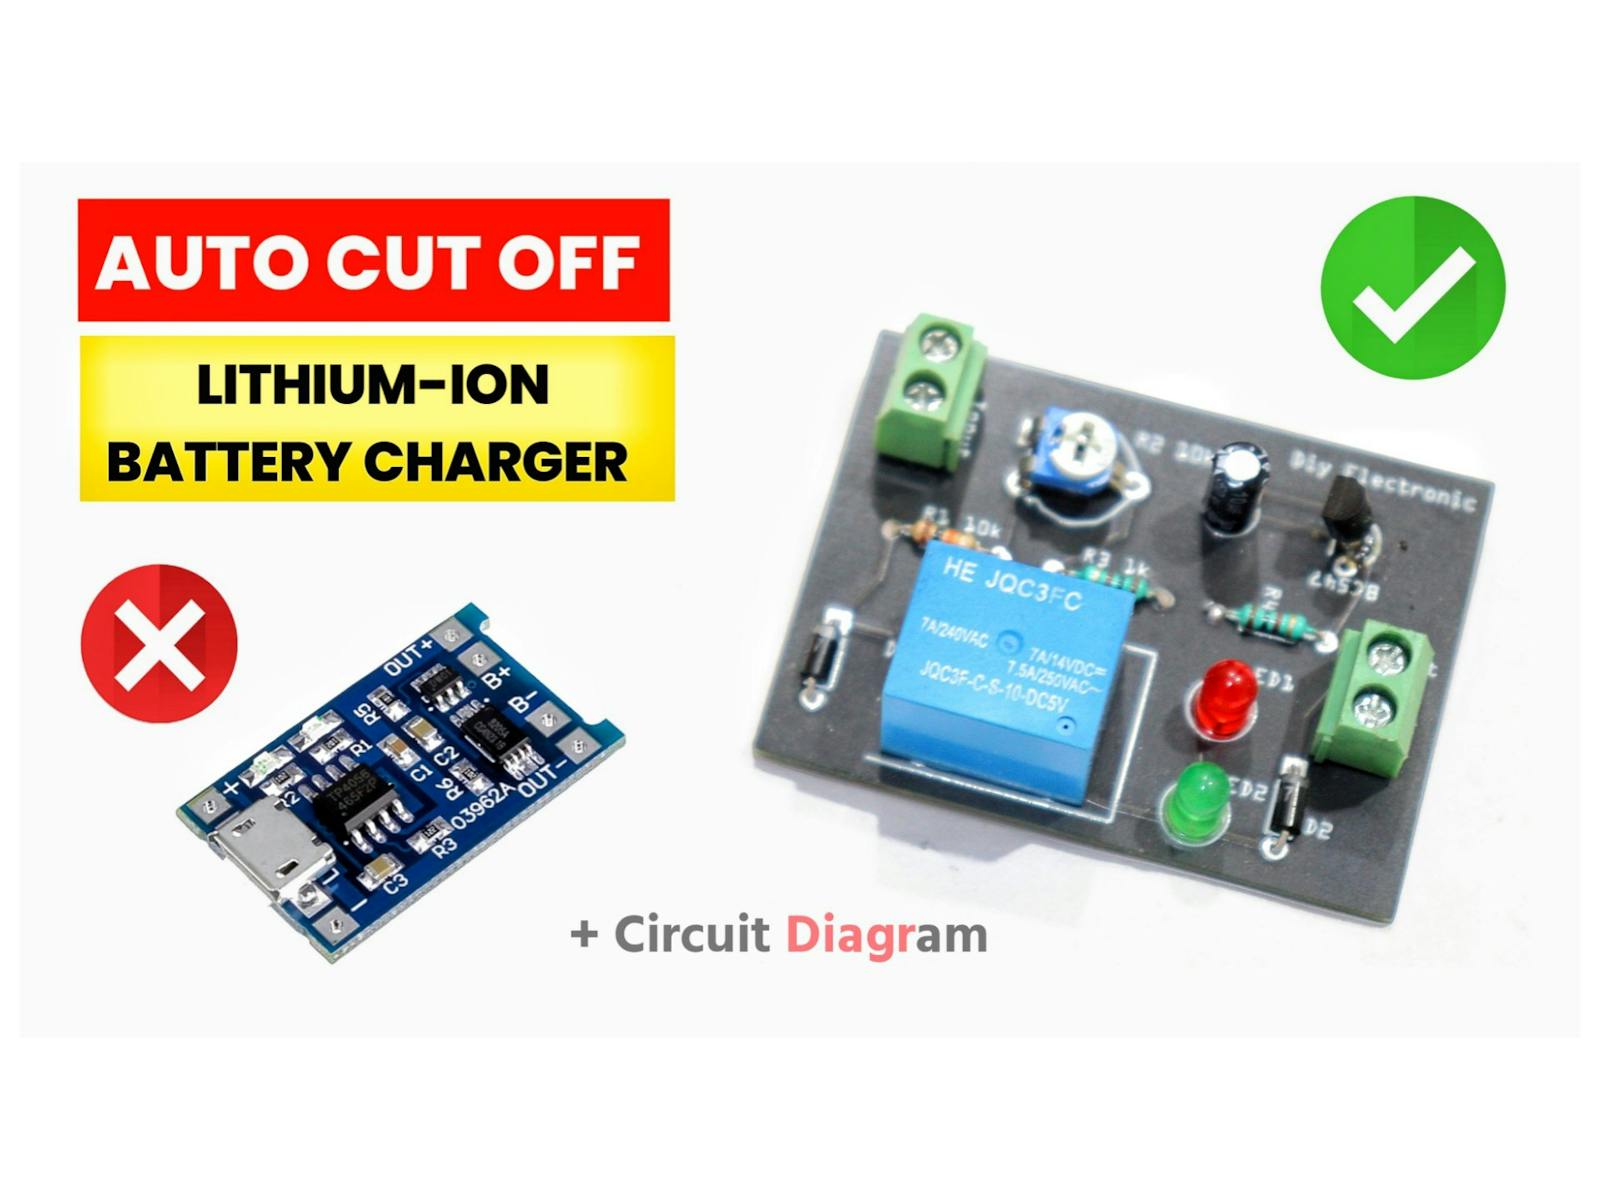 Auto off 3.7 volt Lithium-ion Battery Charger Circuit - Hackster.io